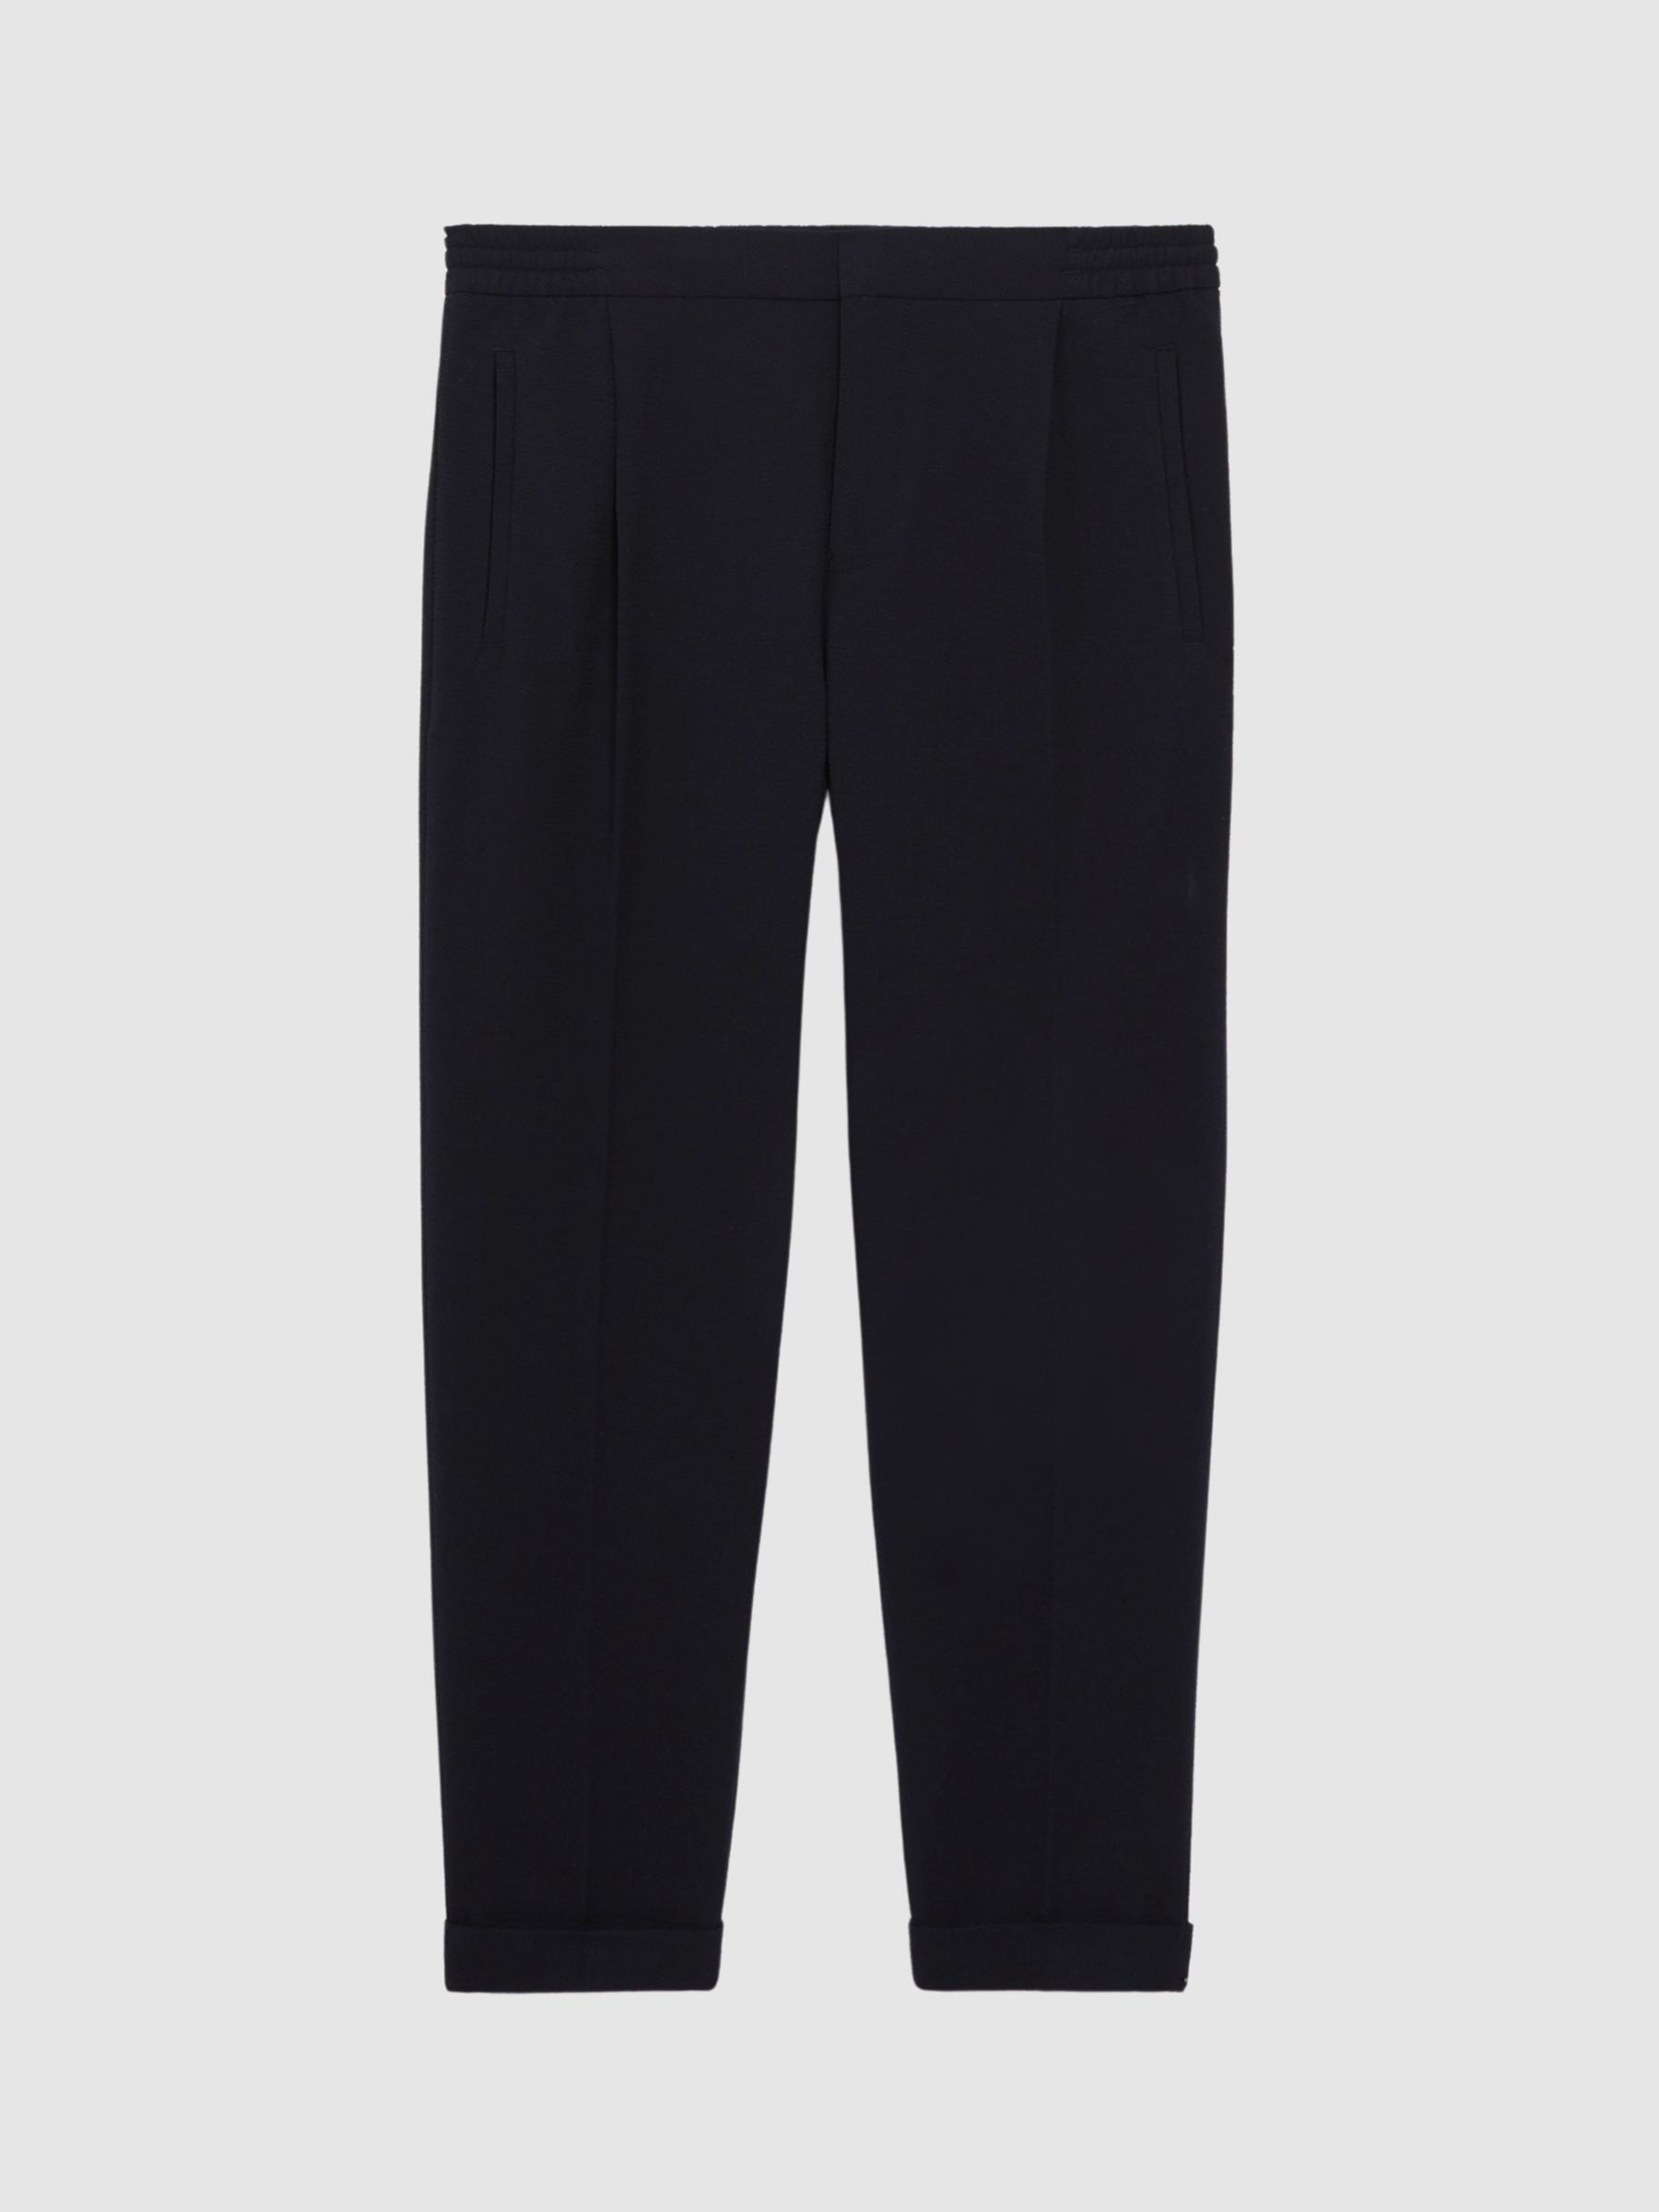 Reiss Berry Drawstring Trousers, Navy at John Lewis & Partners